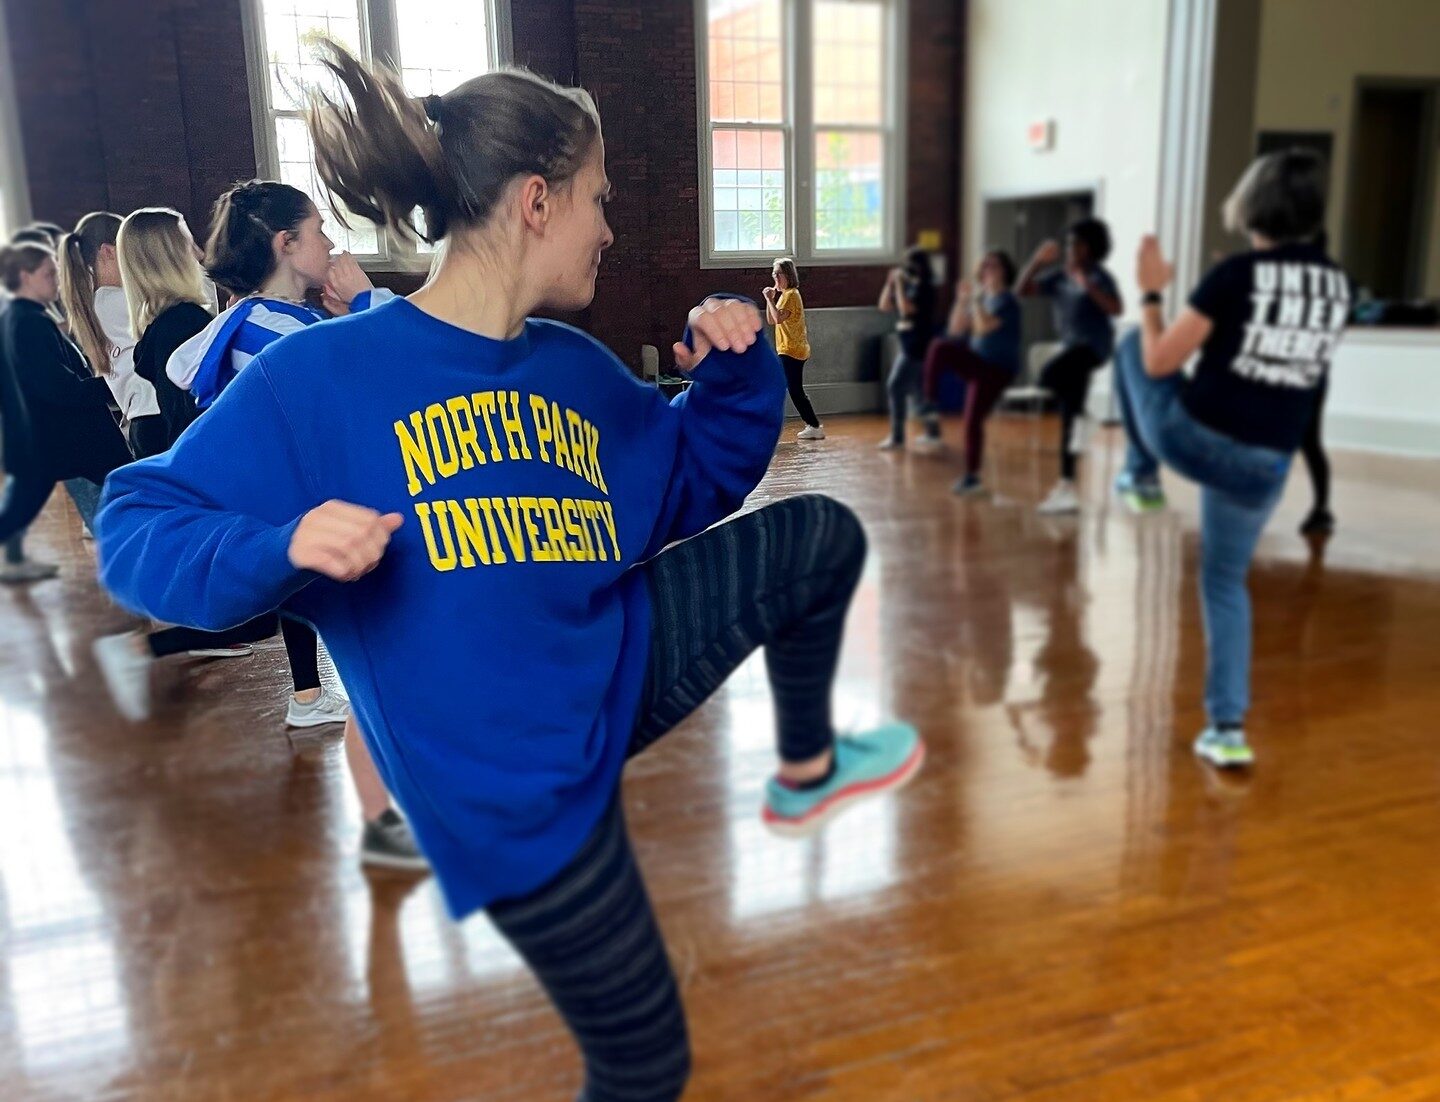 Students learn self-defense during a workshop.